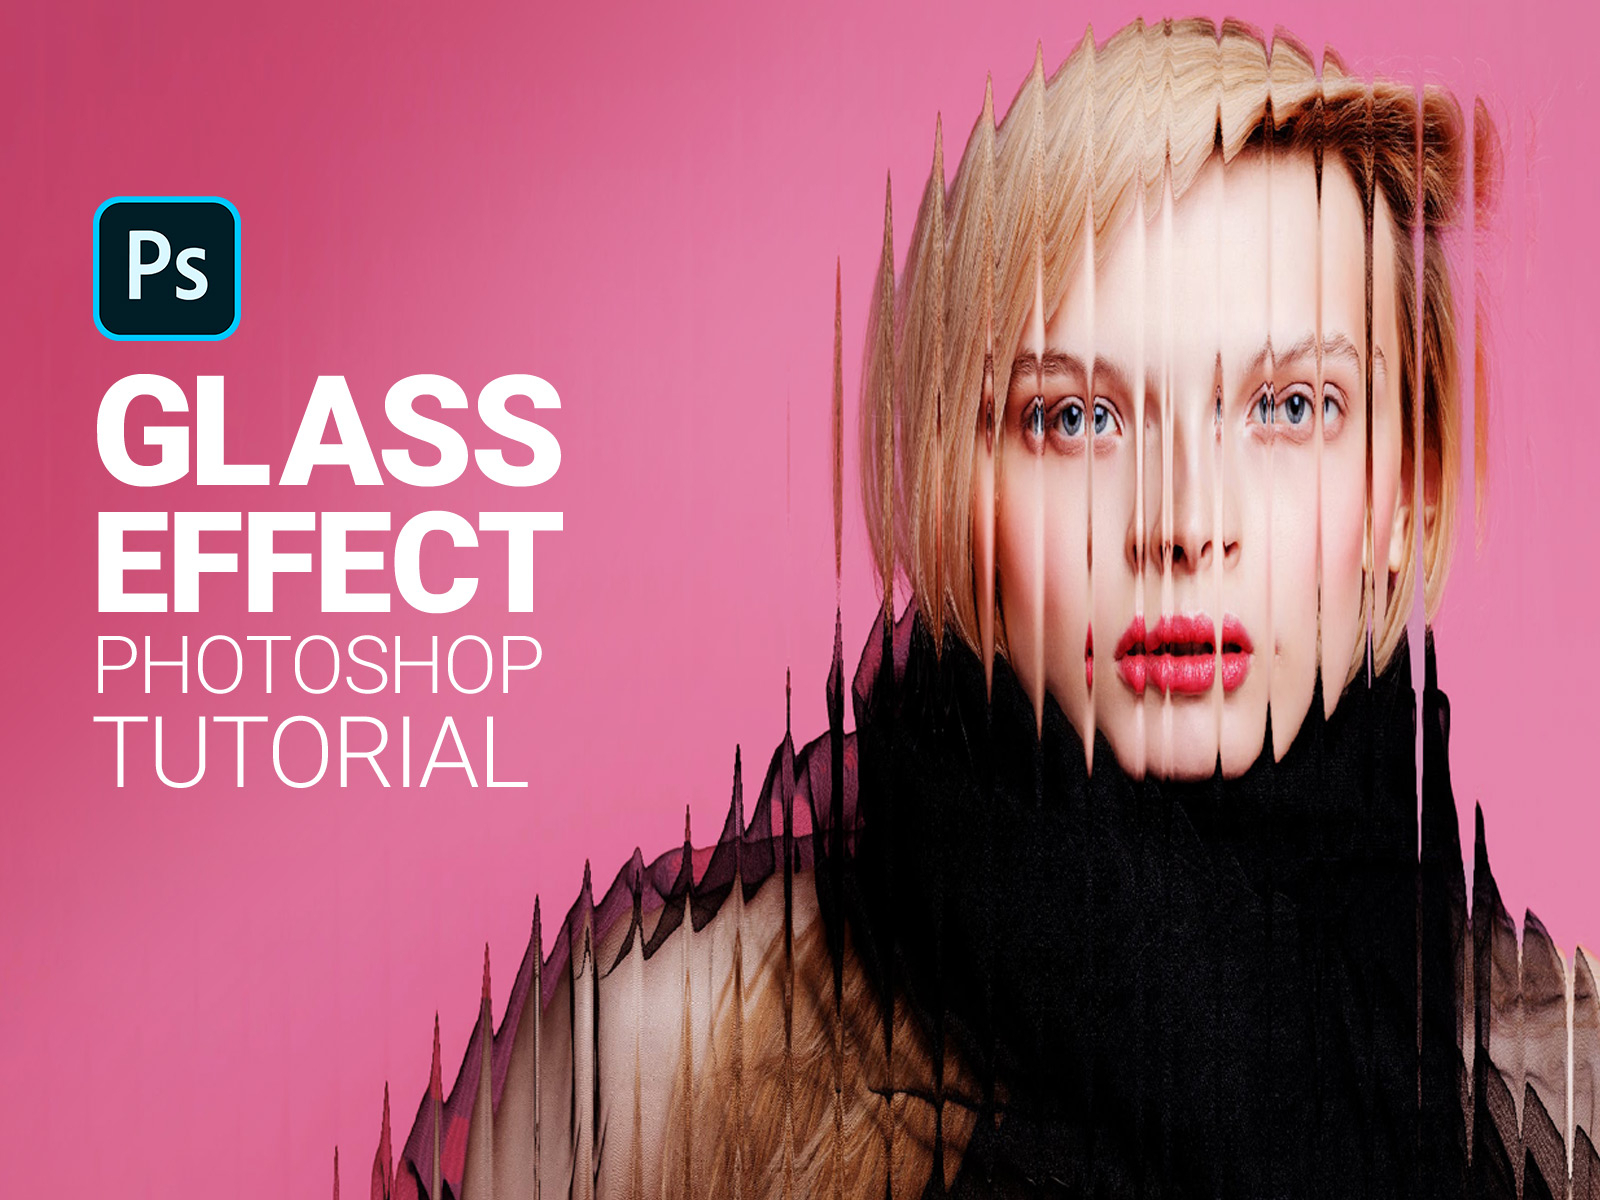 Ribbed Glass Effect : Adobe Photoshop Tutorial by dum-dum know-how on ...